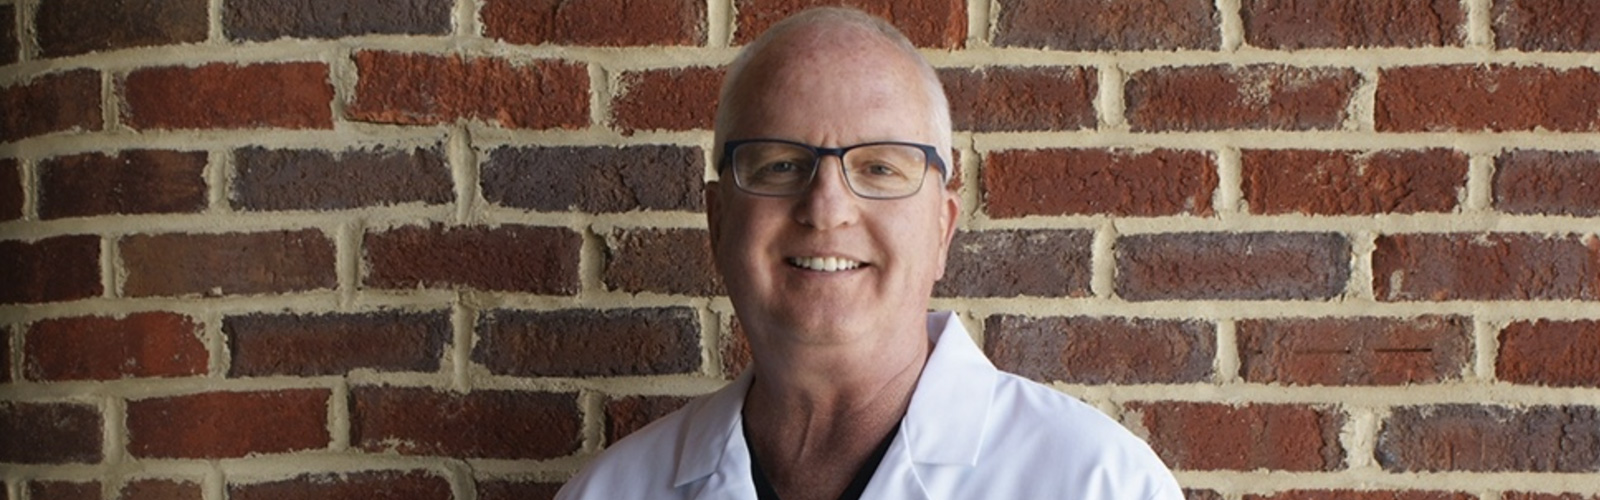 Dr. Feck Reviews the Impact of Recreational Drugs on Dentistry